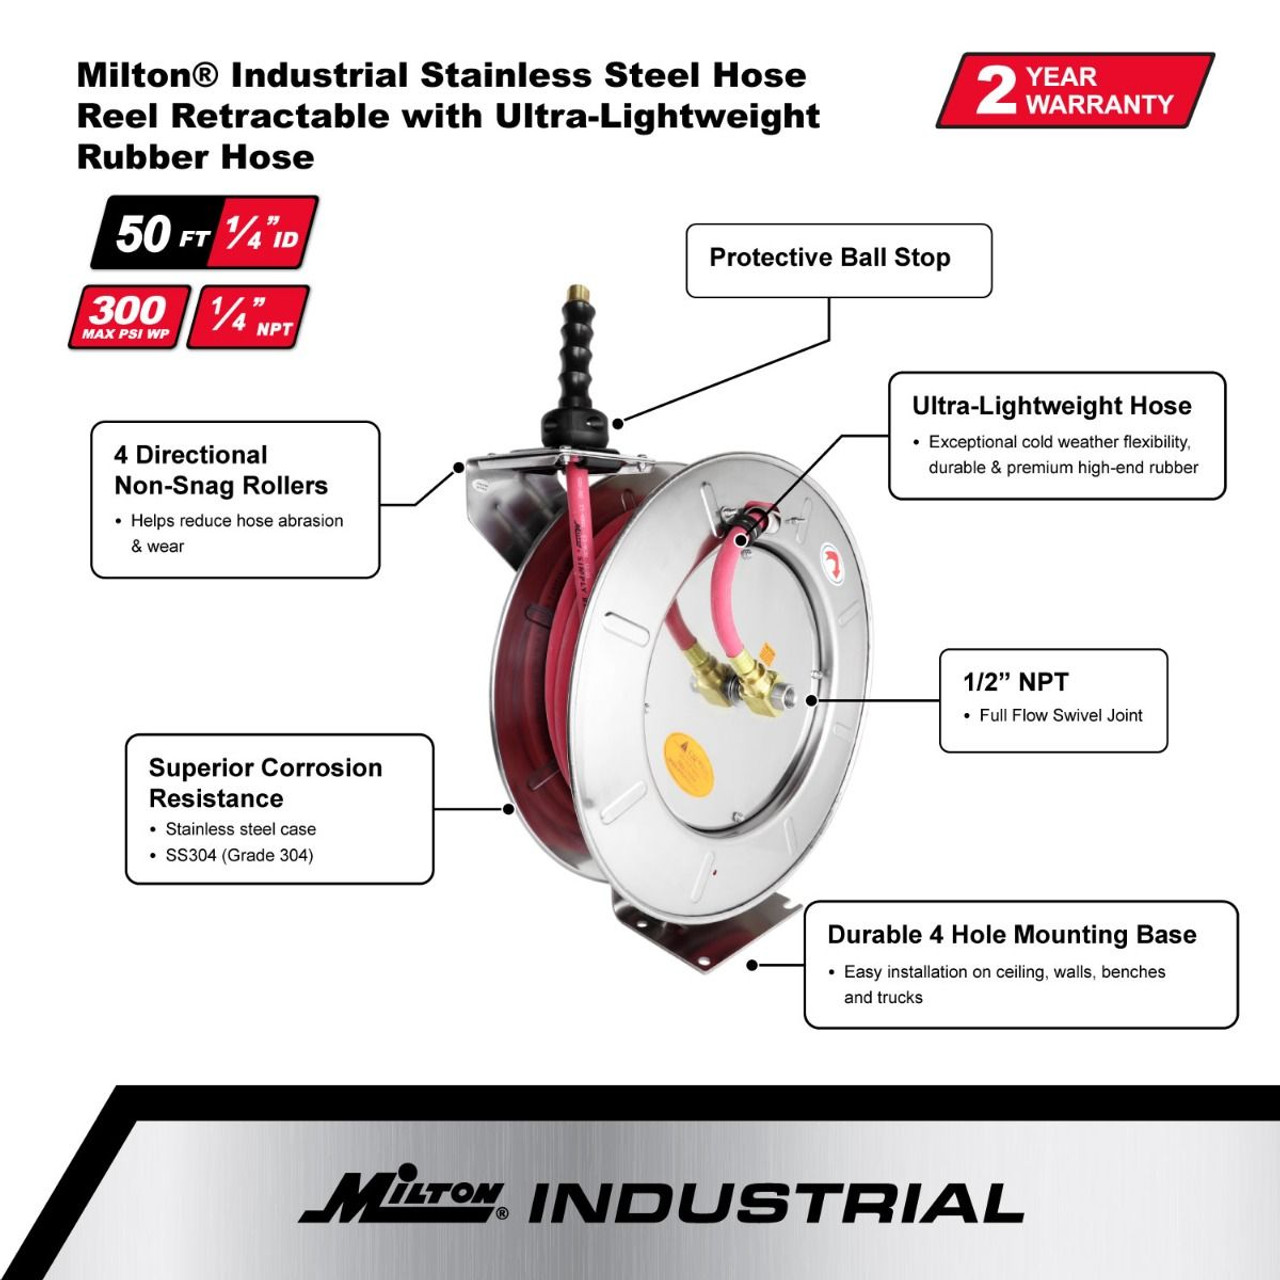 Milton? Industrial Stainless Steel Hose Reel Retractable, 1/4" ID x 50' Ultra-Lightweight Rubber hose w/ 1/4" NPT, 300 PSI